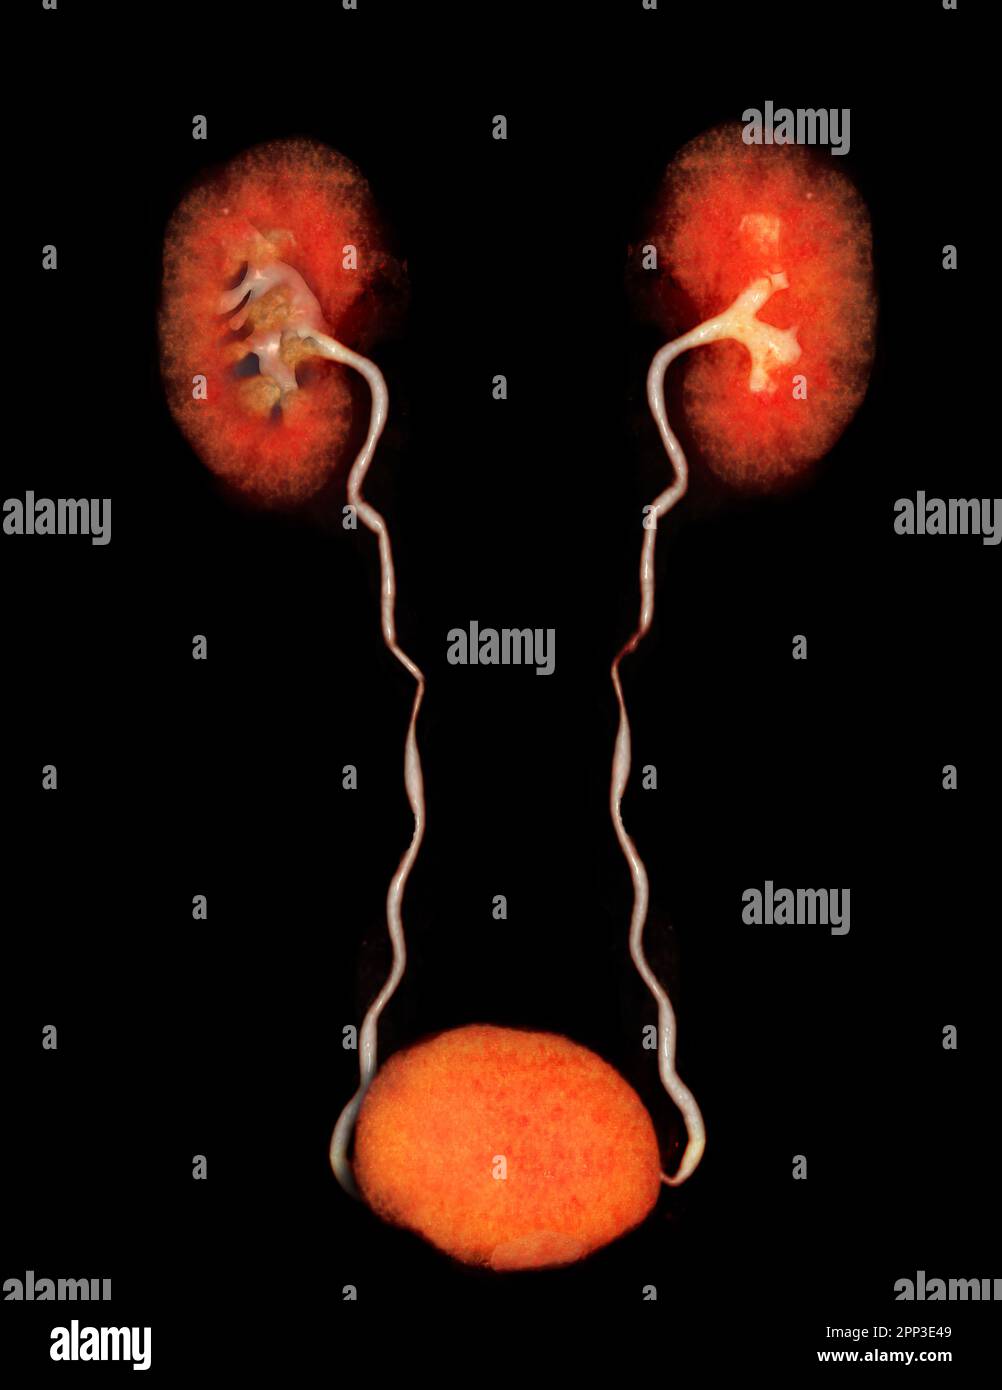 CTA Renal artery  3D rendering image  showing both kidney, Ureter and bladder . Stock Photo